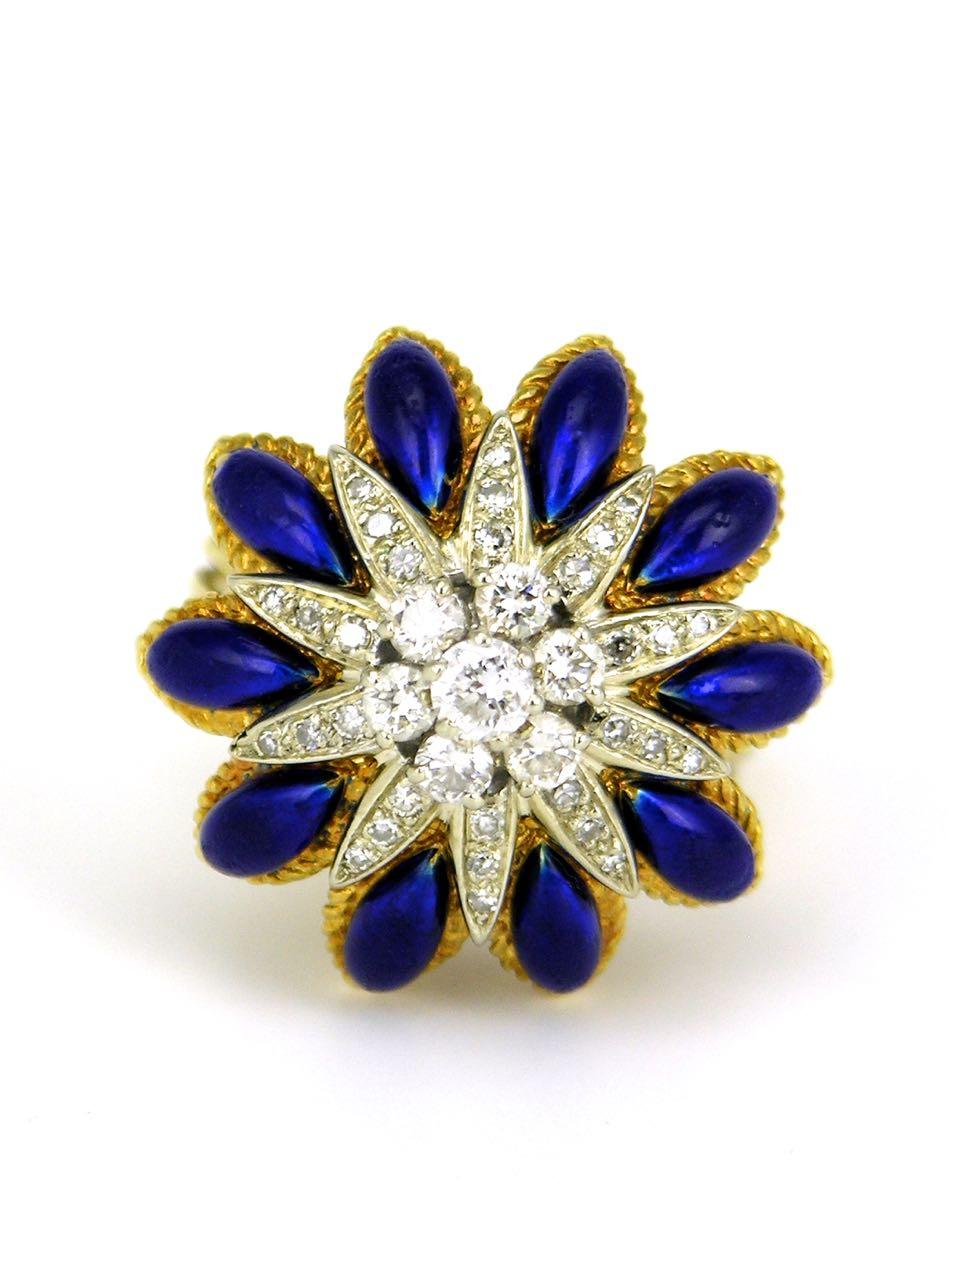 A bold domed ring with a central cluster of 7 round brilliant cut diamonds surrounded by a further 30 single cut diamonds in a star design; the points interspersed with domed marquis panels of royal blue enamel mounted on a tapered four row wire